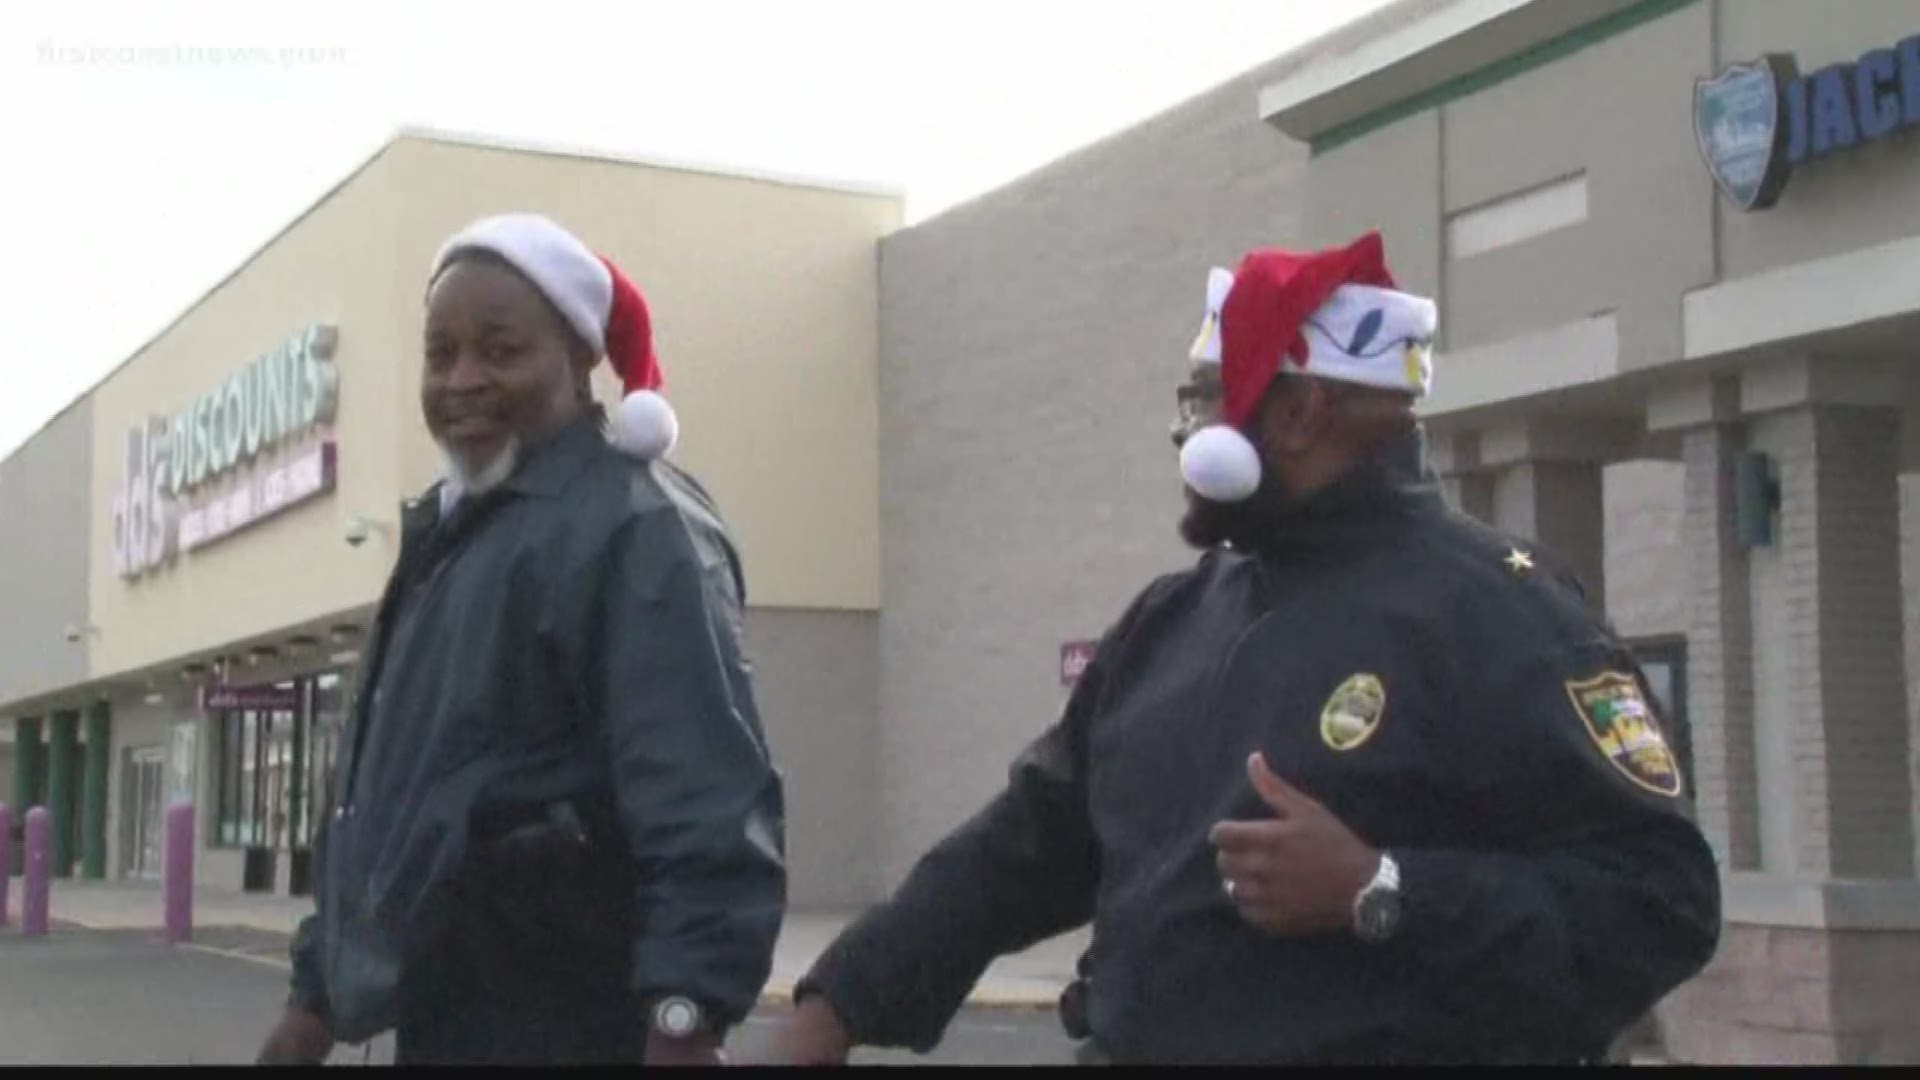 Officers with the Jacksonville Sheriff's Office spent Friday looking for people who could use a little help during this year's holiday season.